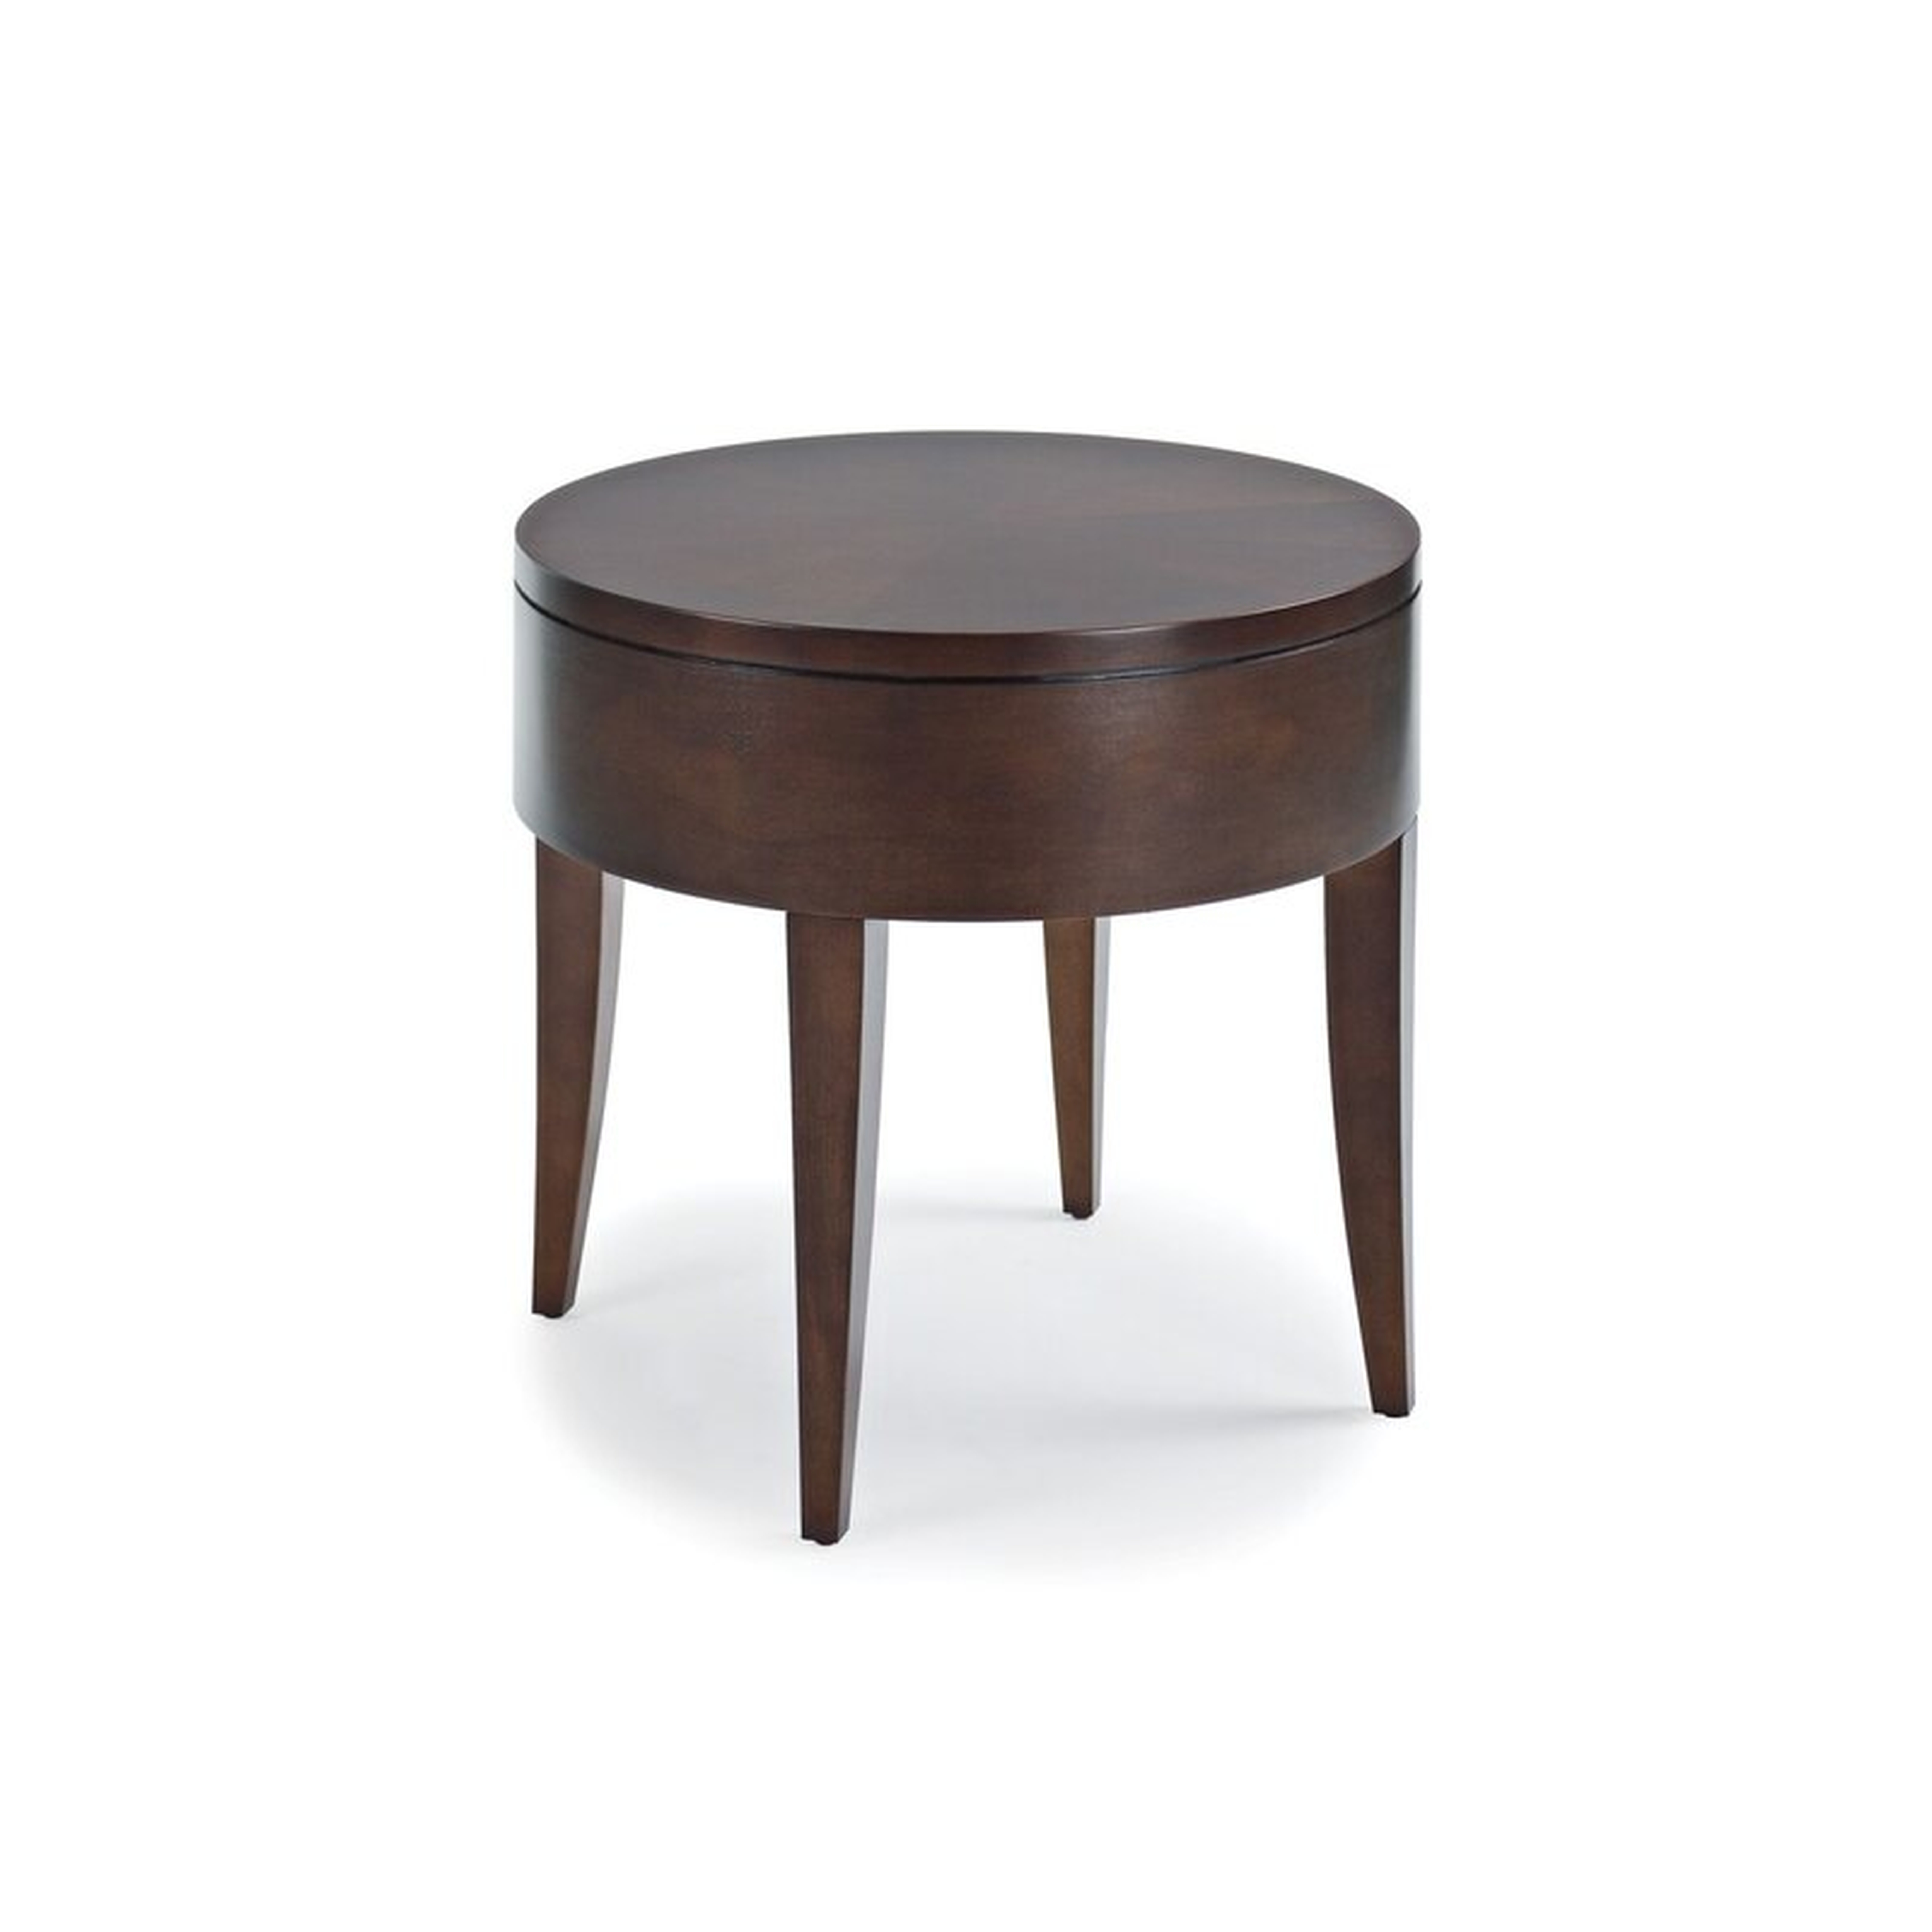 Cabot Wrenn Diego Solid Wood End Table - Perigold